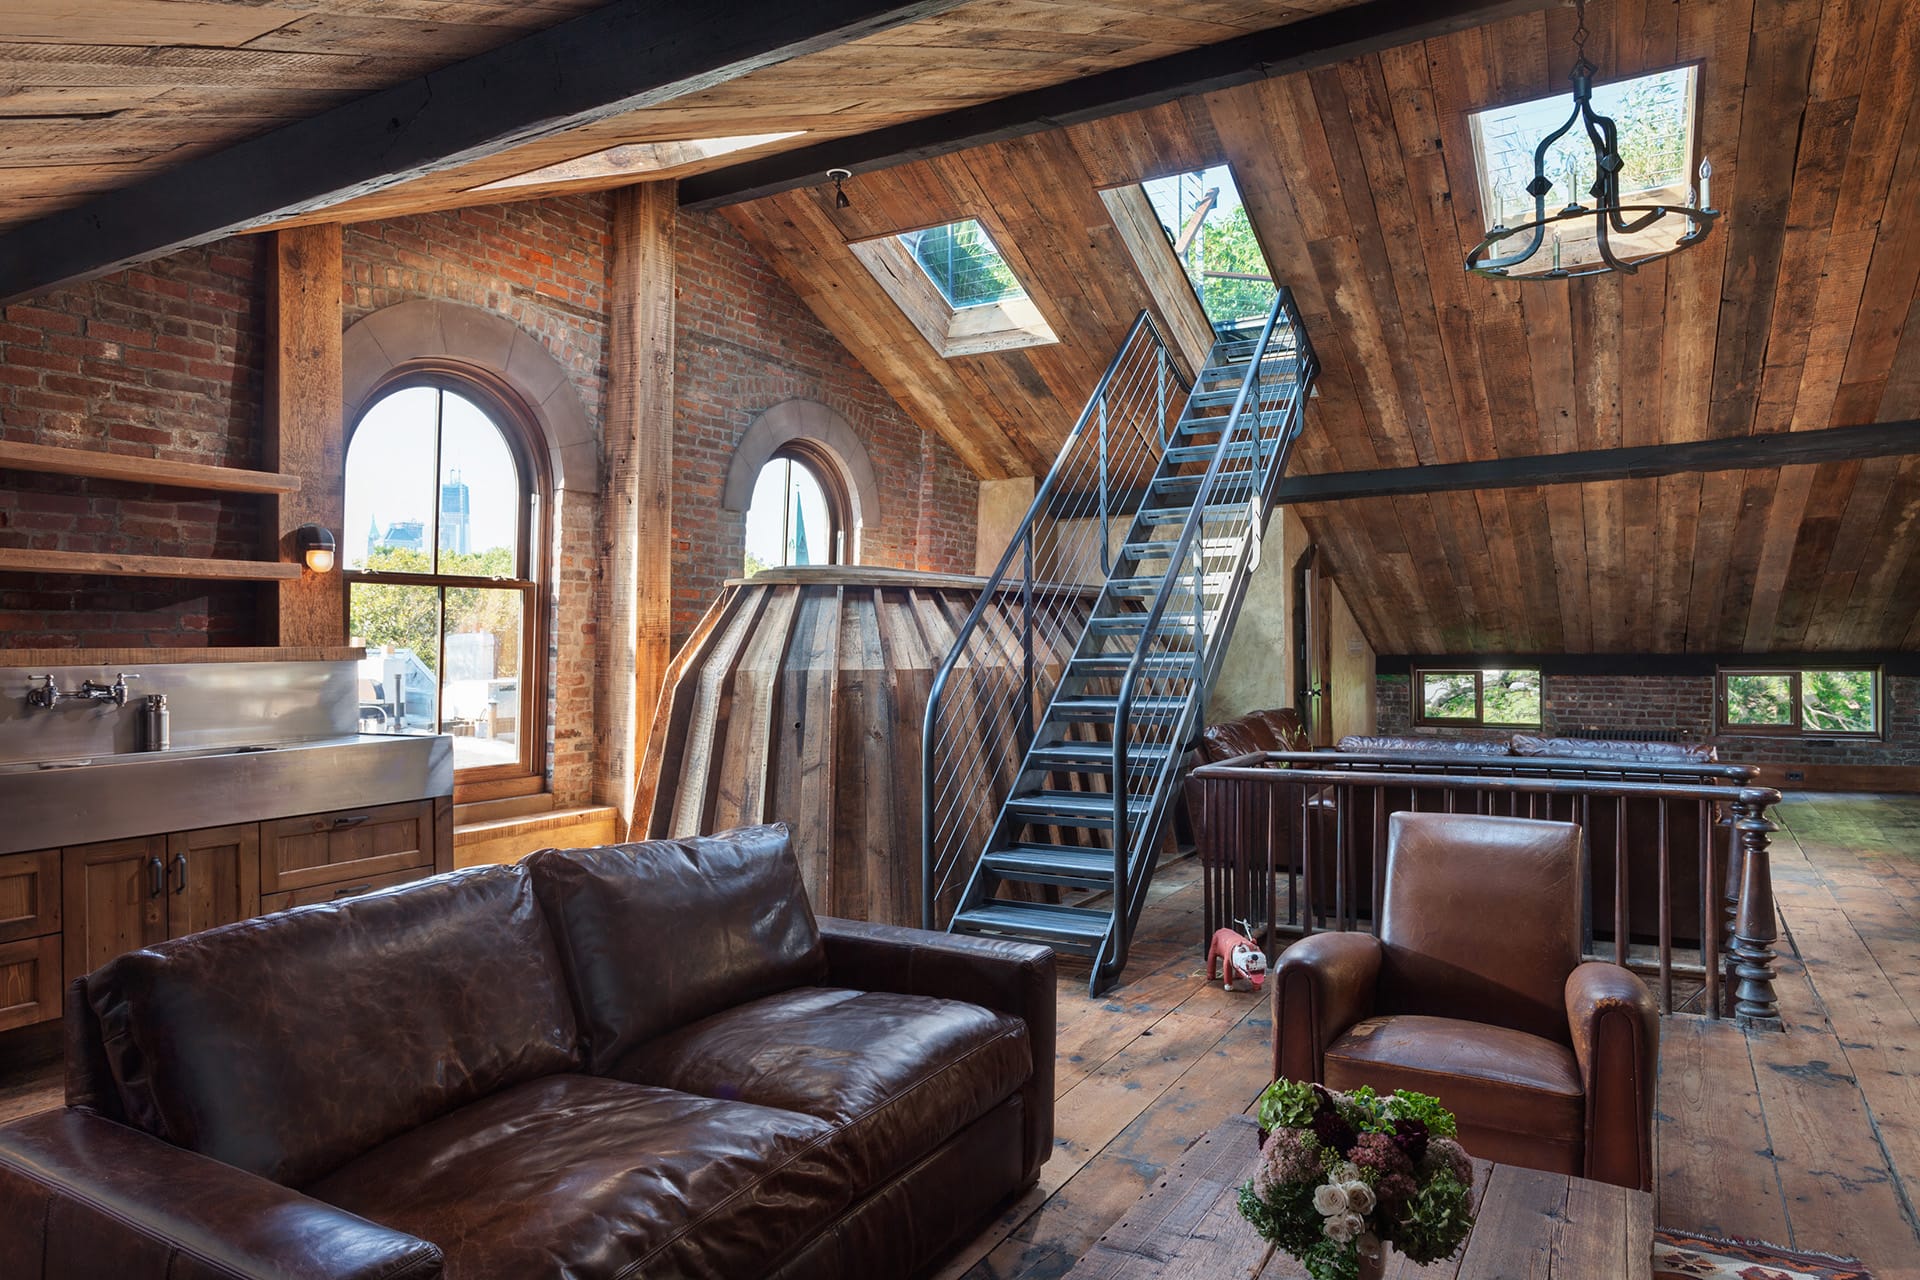 Attic of a Brooklyn Heights home with four windows, three skylights, a metal staircase leading to the roof, wood paneled ceiling and exposed brick walls.